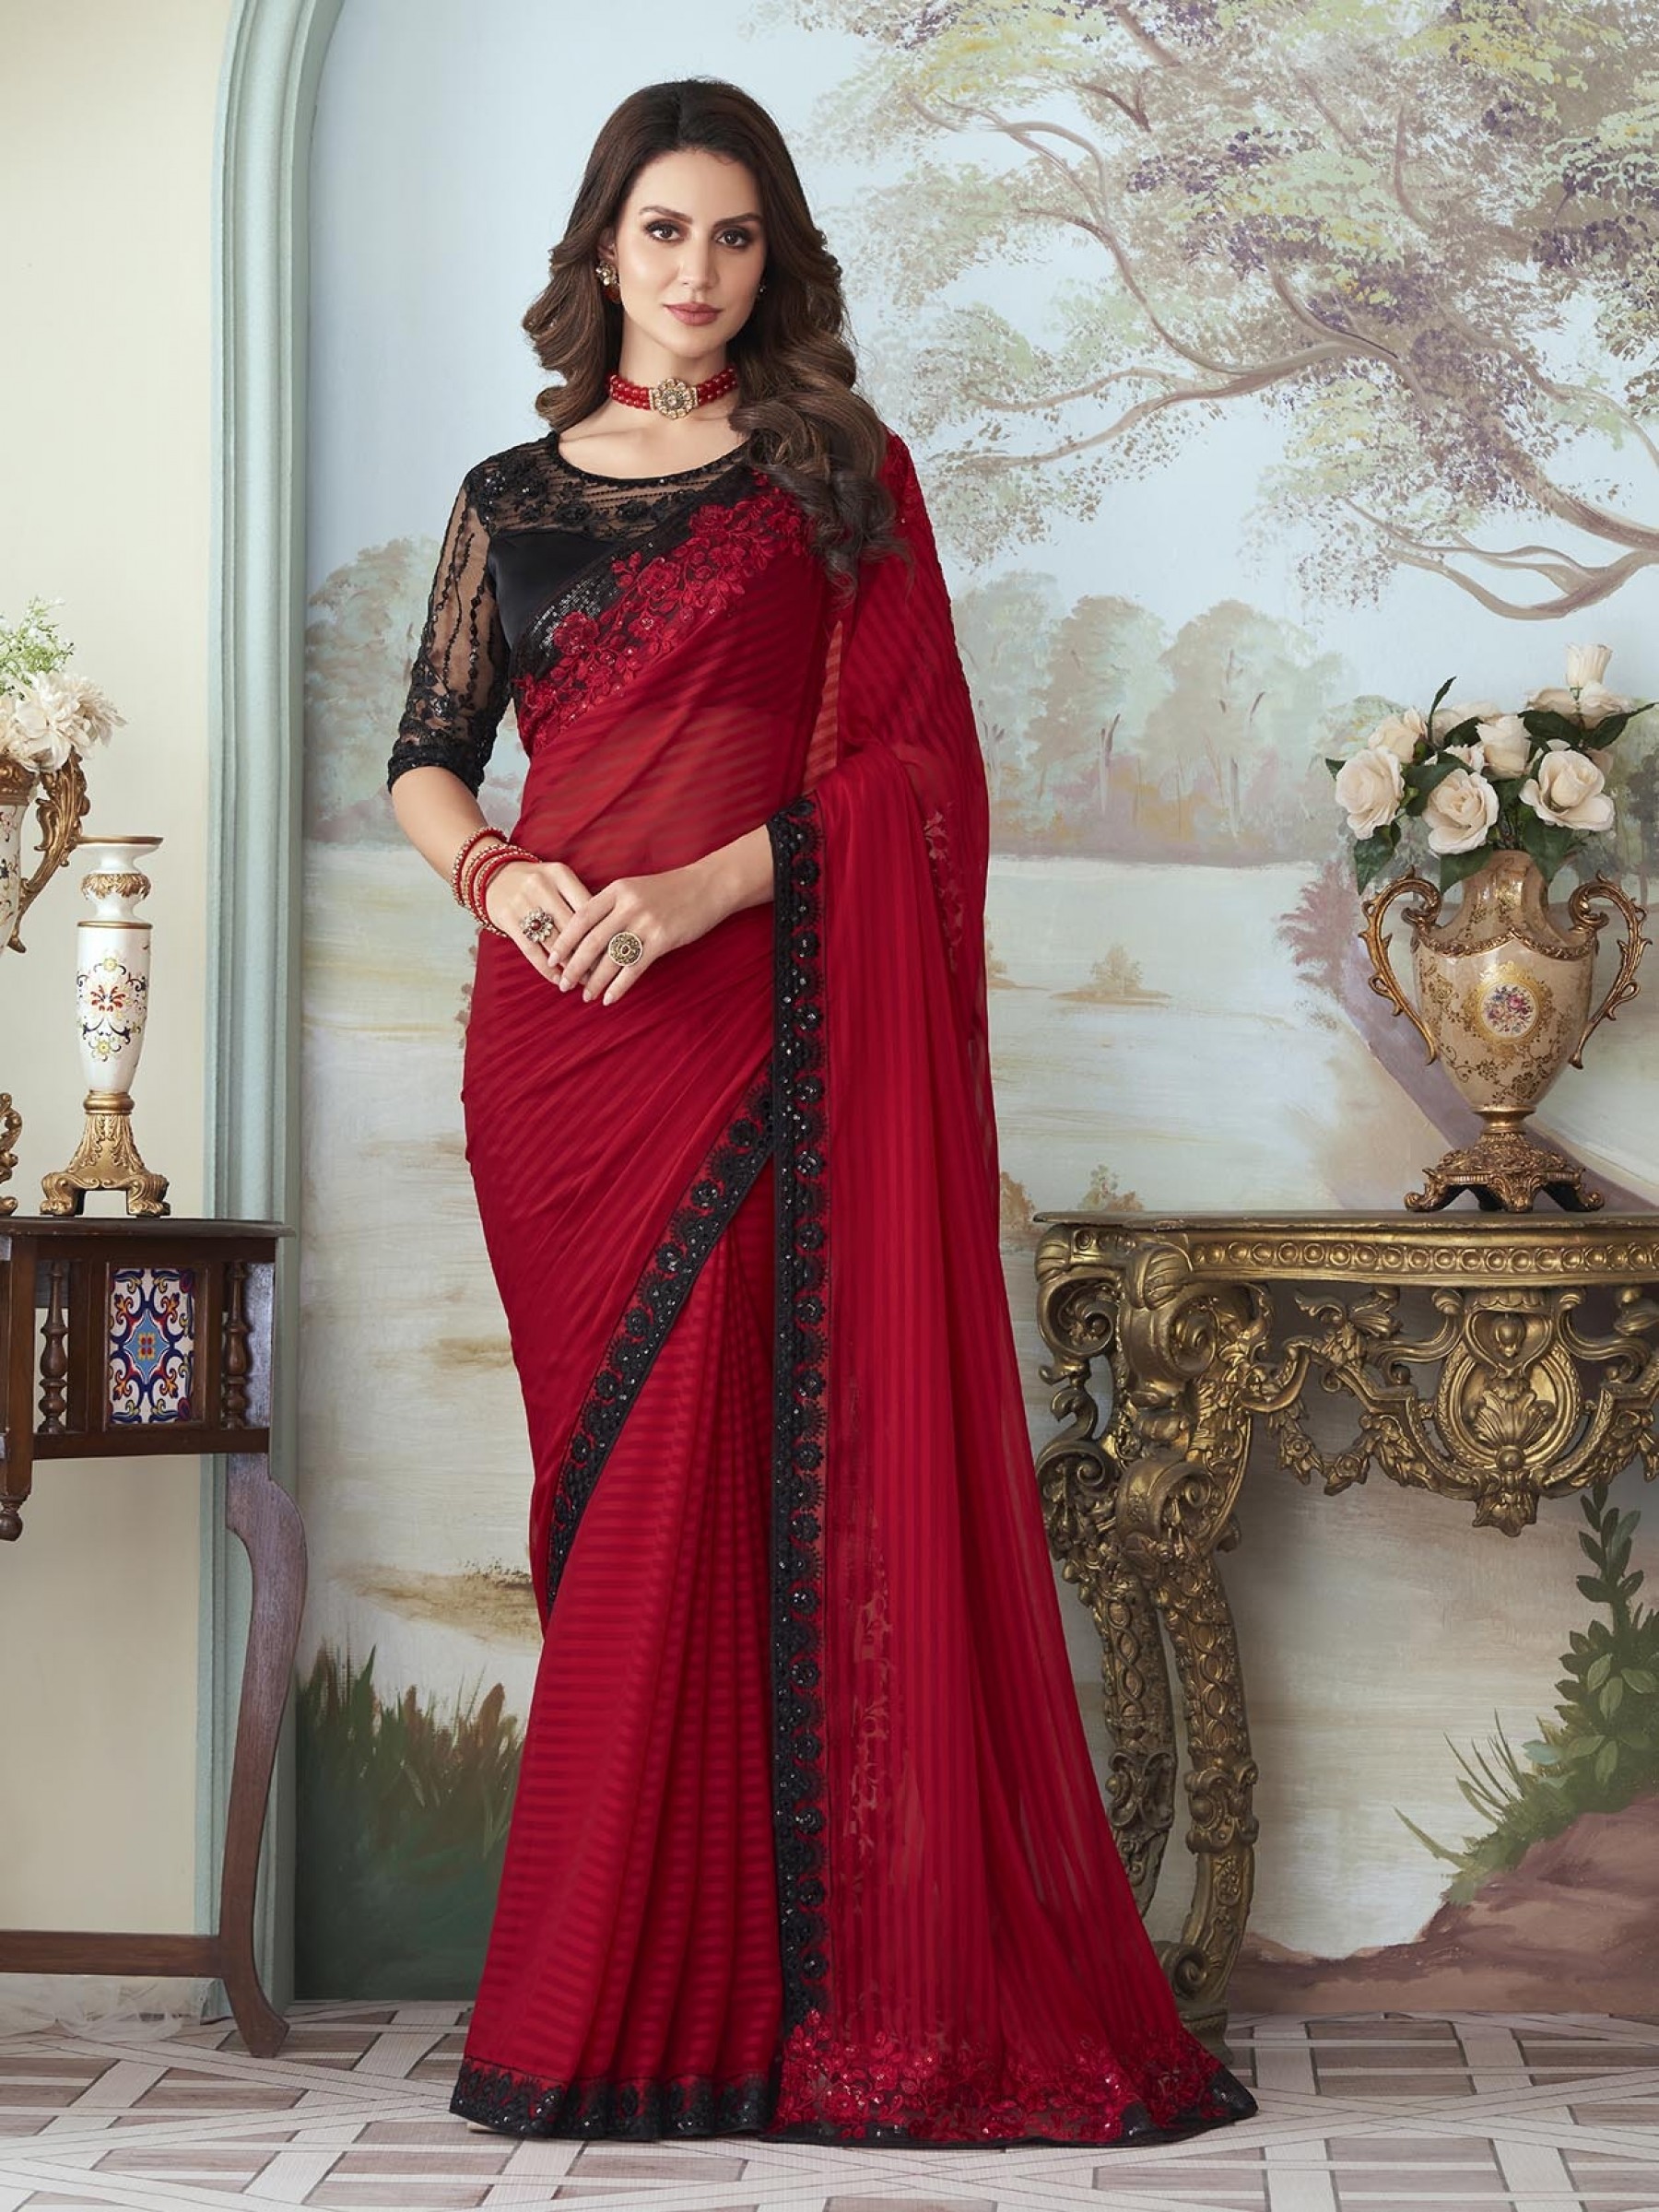 Simmer Silk  Saree Red Color With Embroidery Work